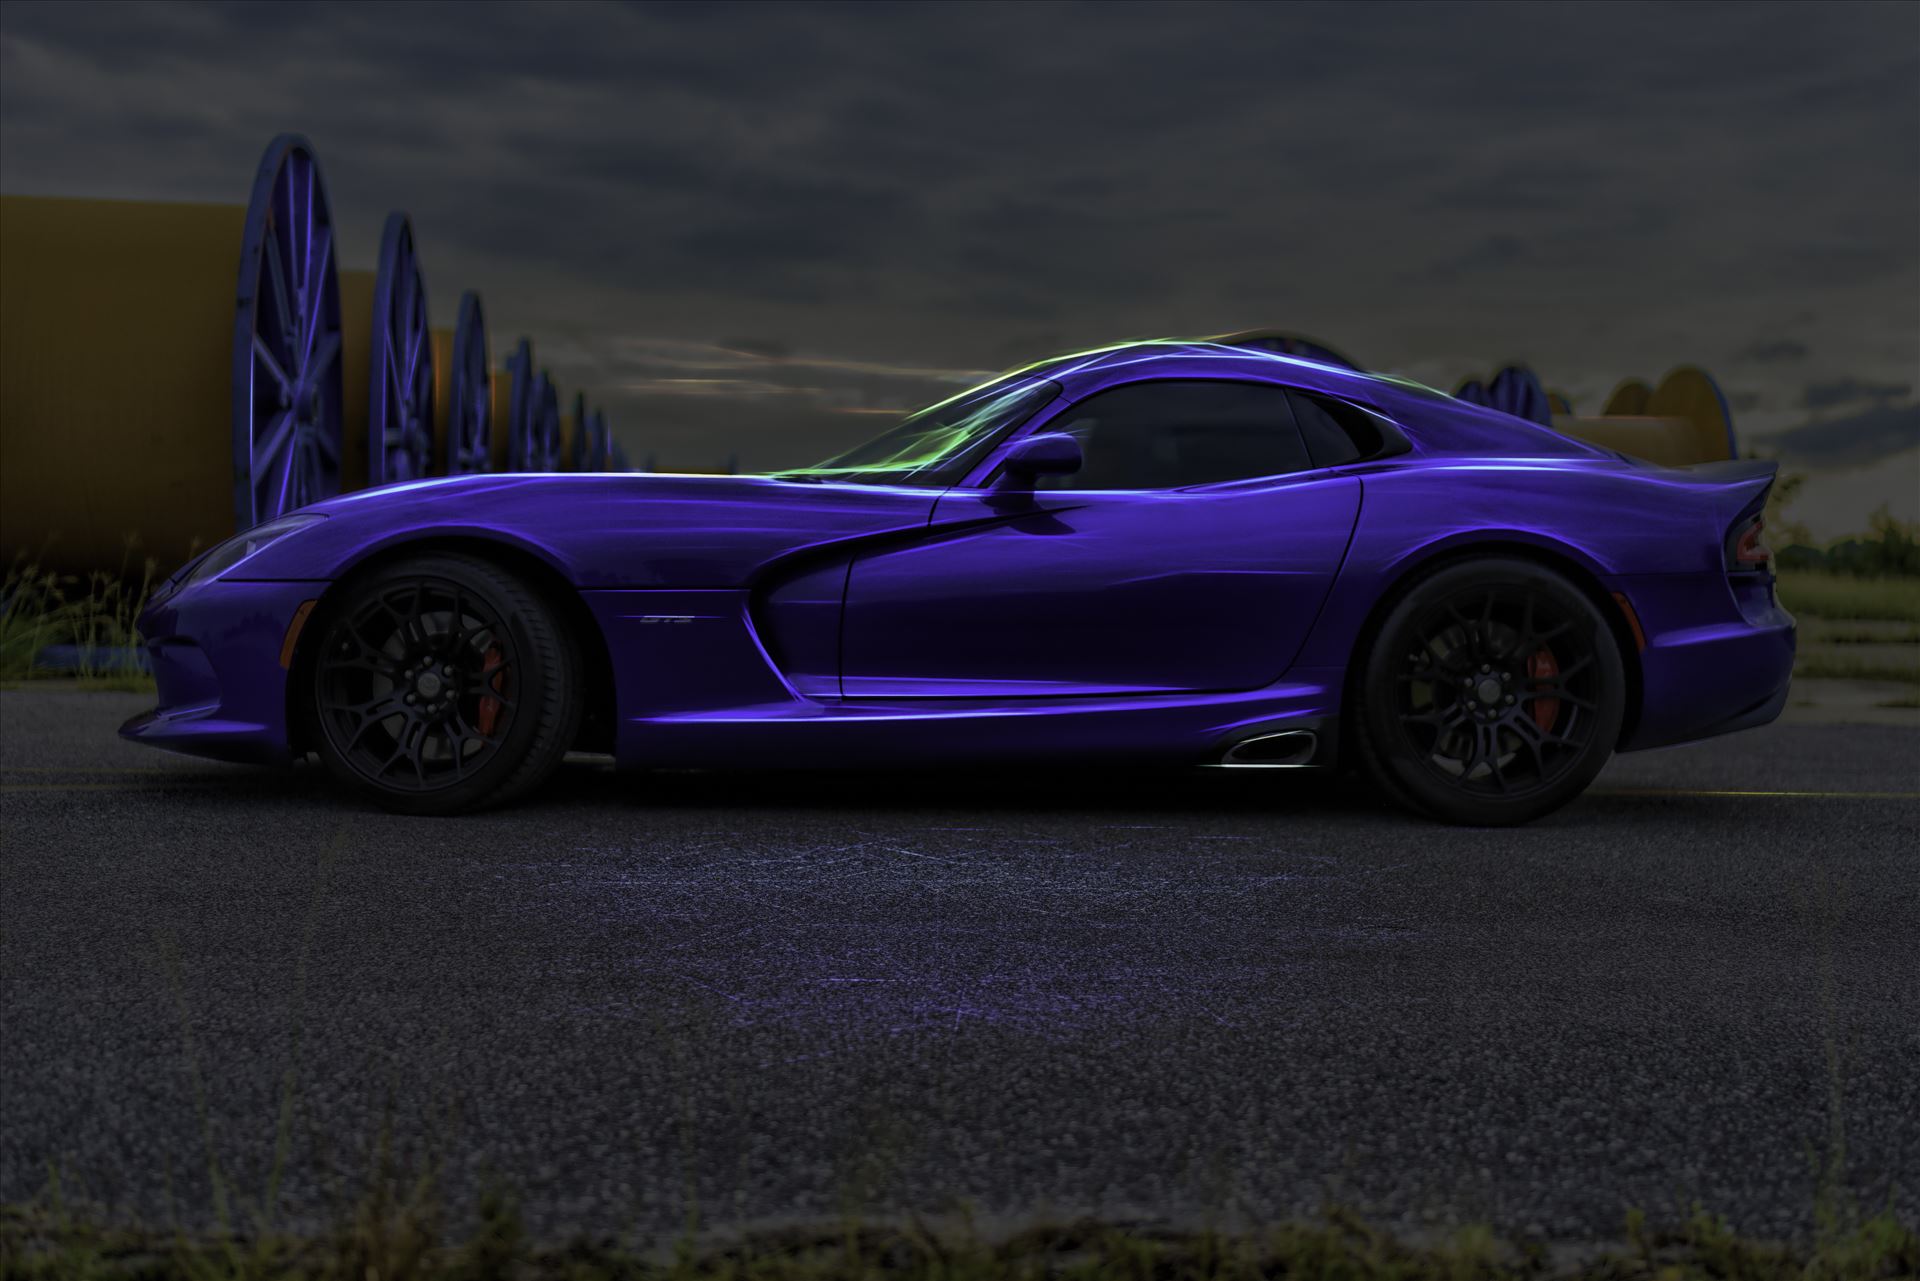 viper 5114.jpg -  by Terry Kelly Photography